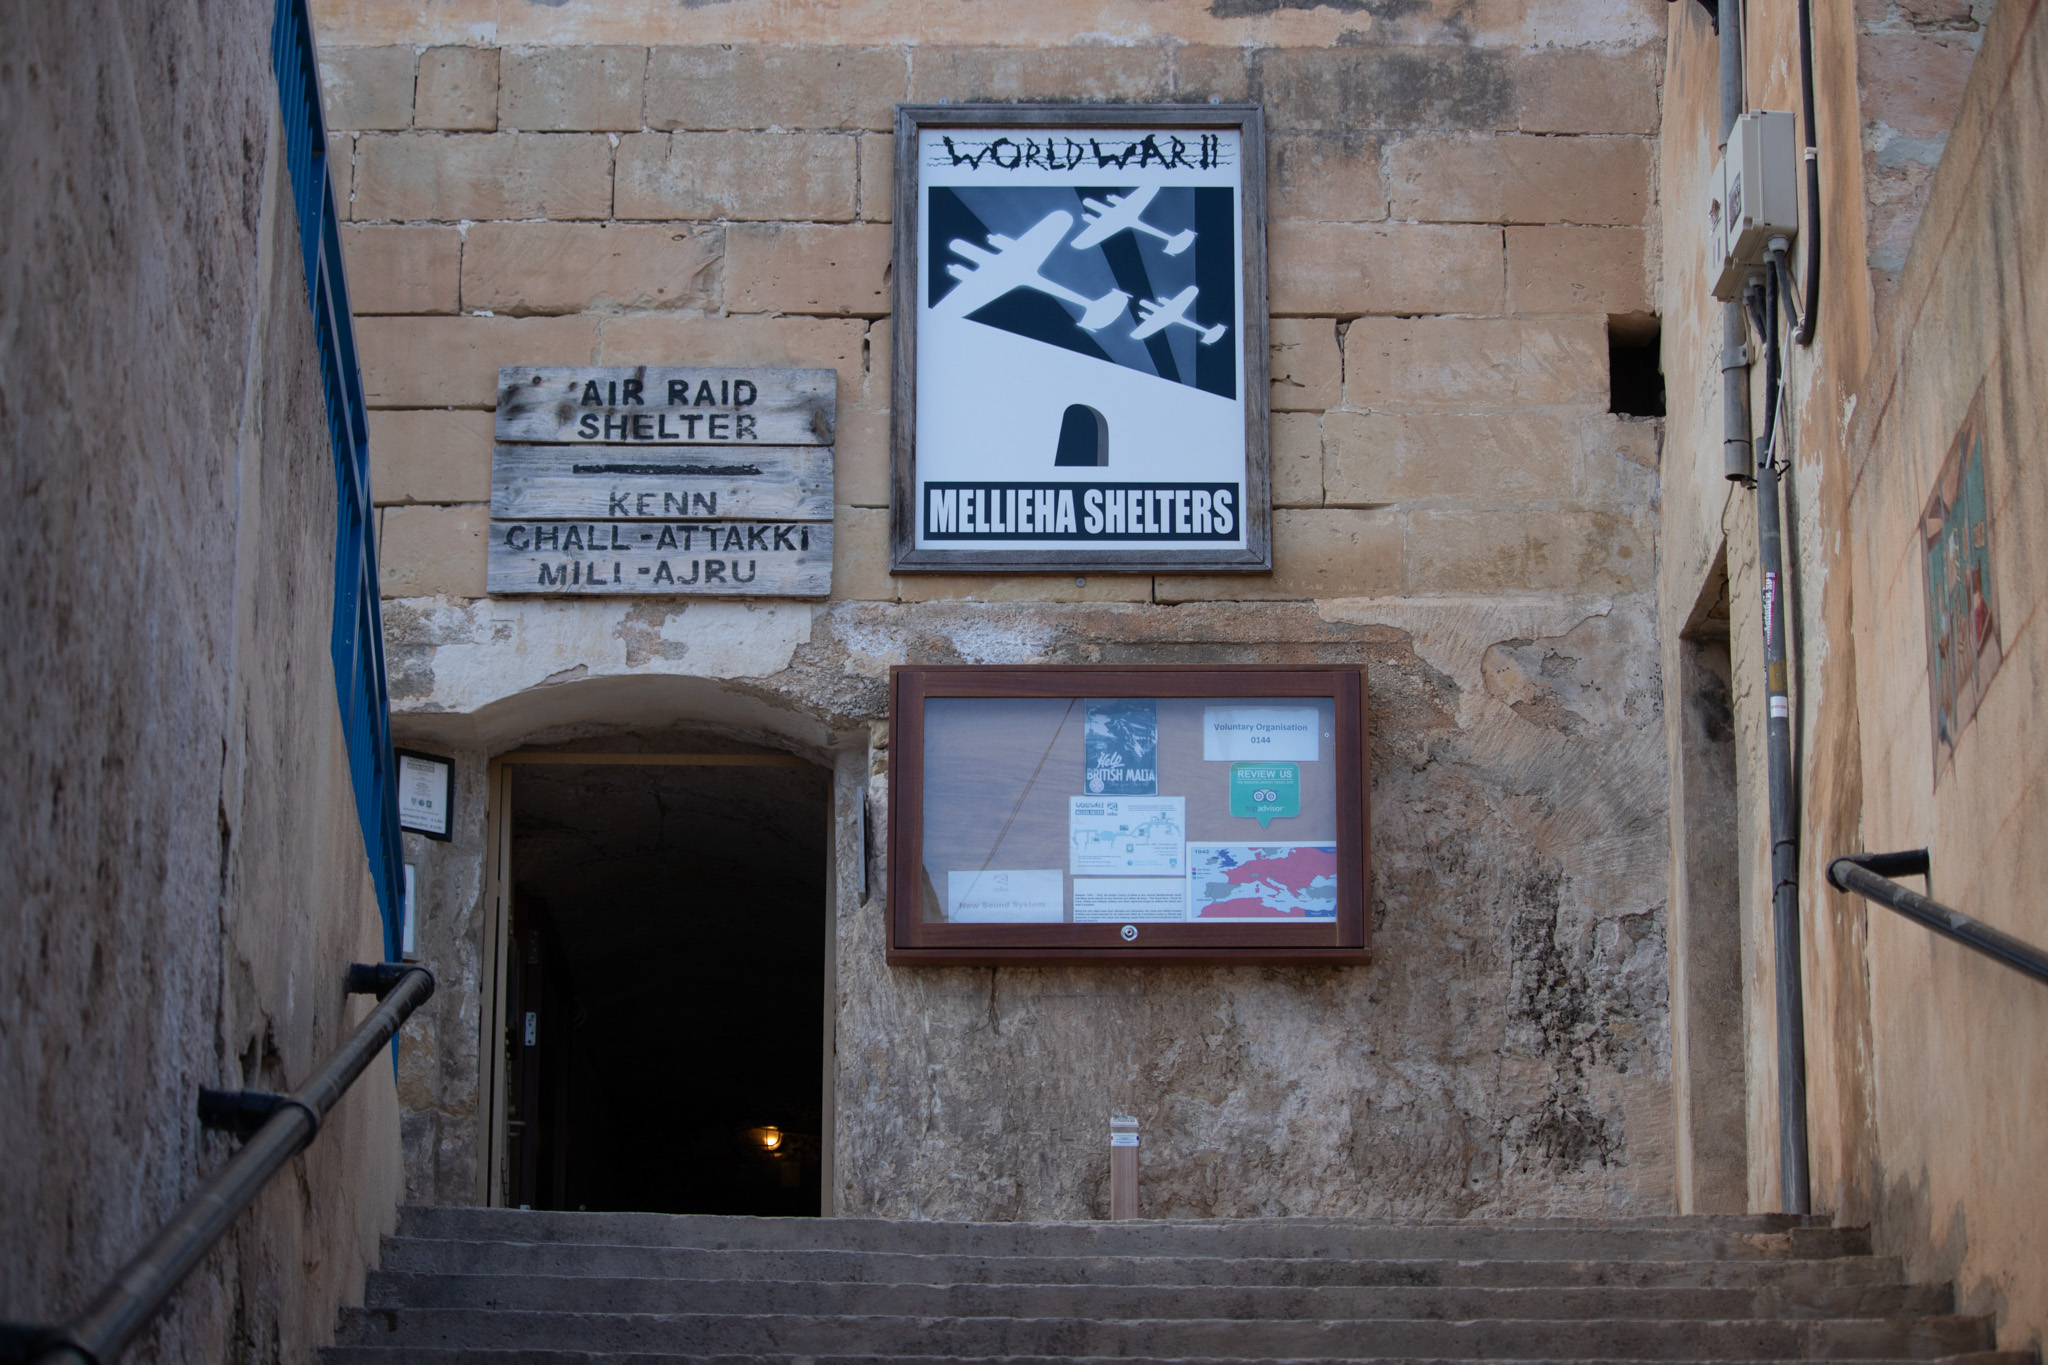 NEXO sound brings the wartime experience of Maltese people to life at museum in Mellieha